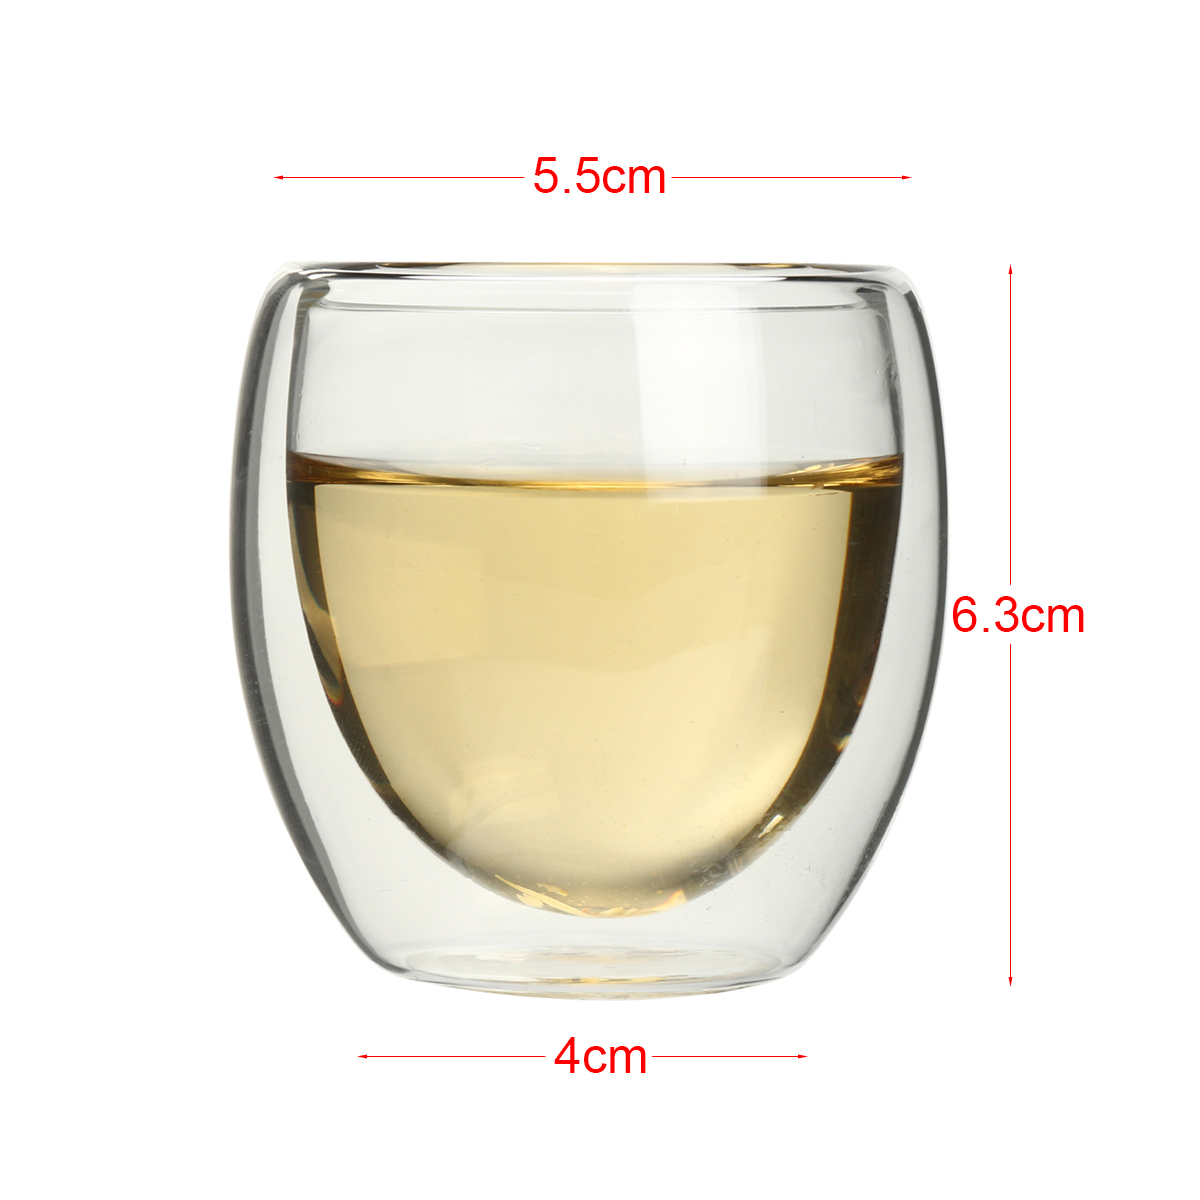 80ml-Clear-Glass-Double-Wall-Mug-Cup-Insulated-Thermal-Office-Tea-Drinking-Tea-Container-1454945-1